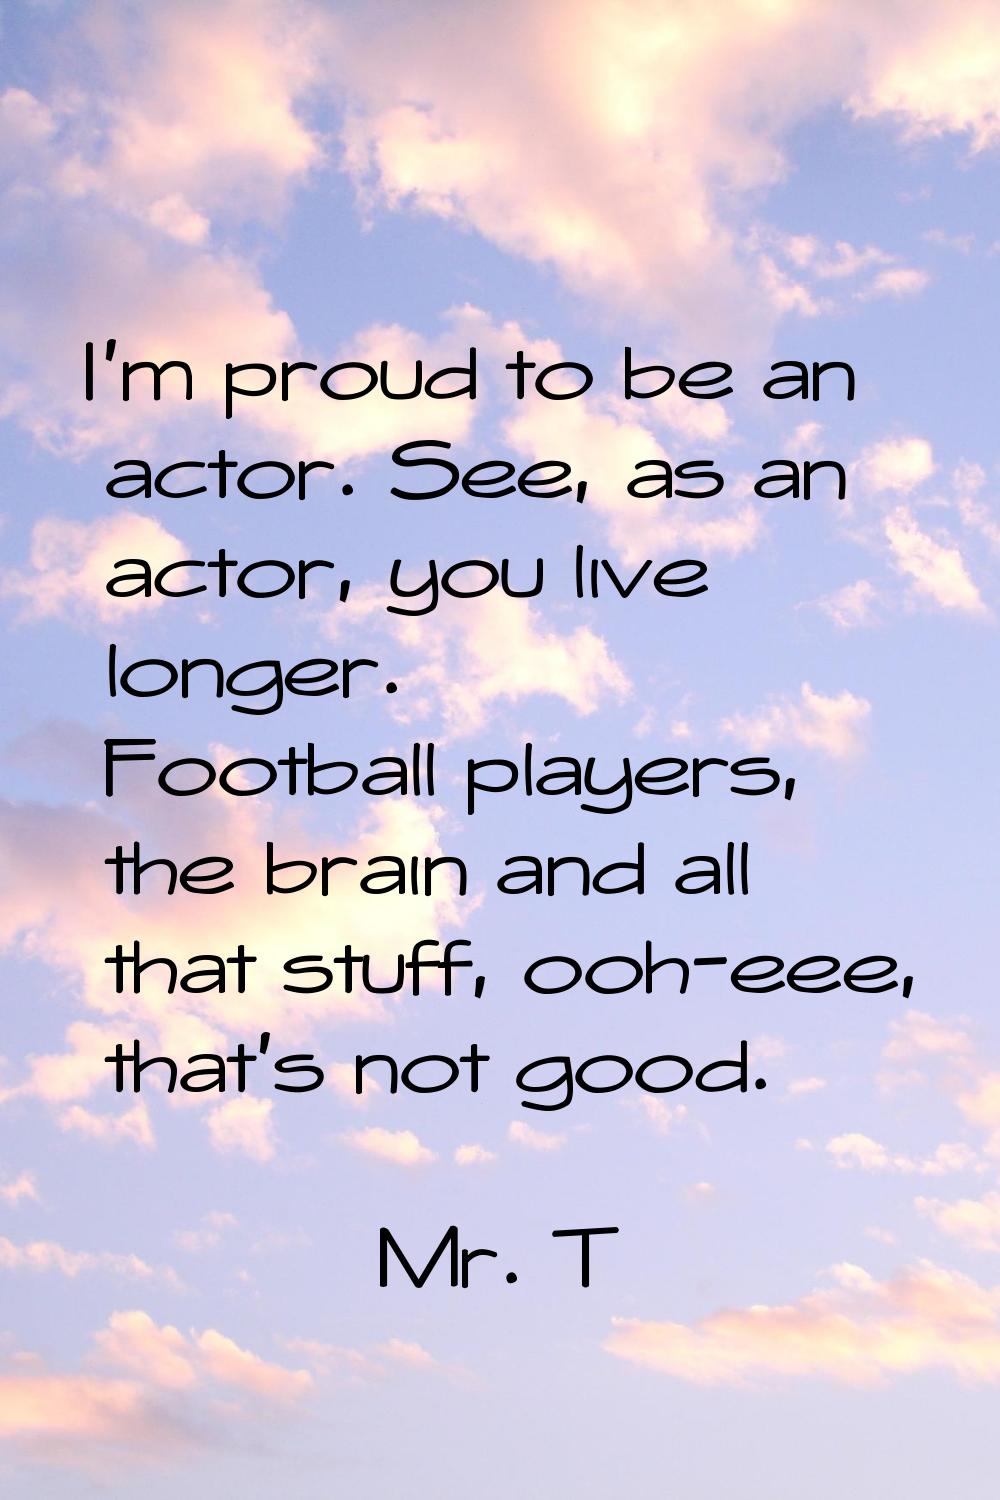 I'm proud to be an actor. See, as an actor, you live longer. Football players, the brain and all th